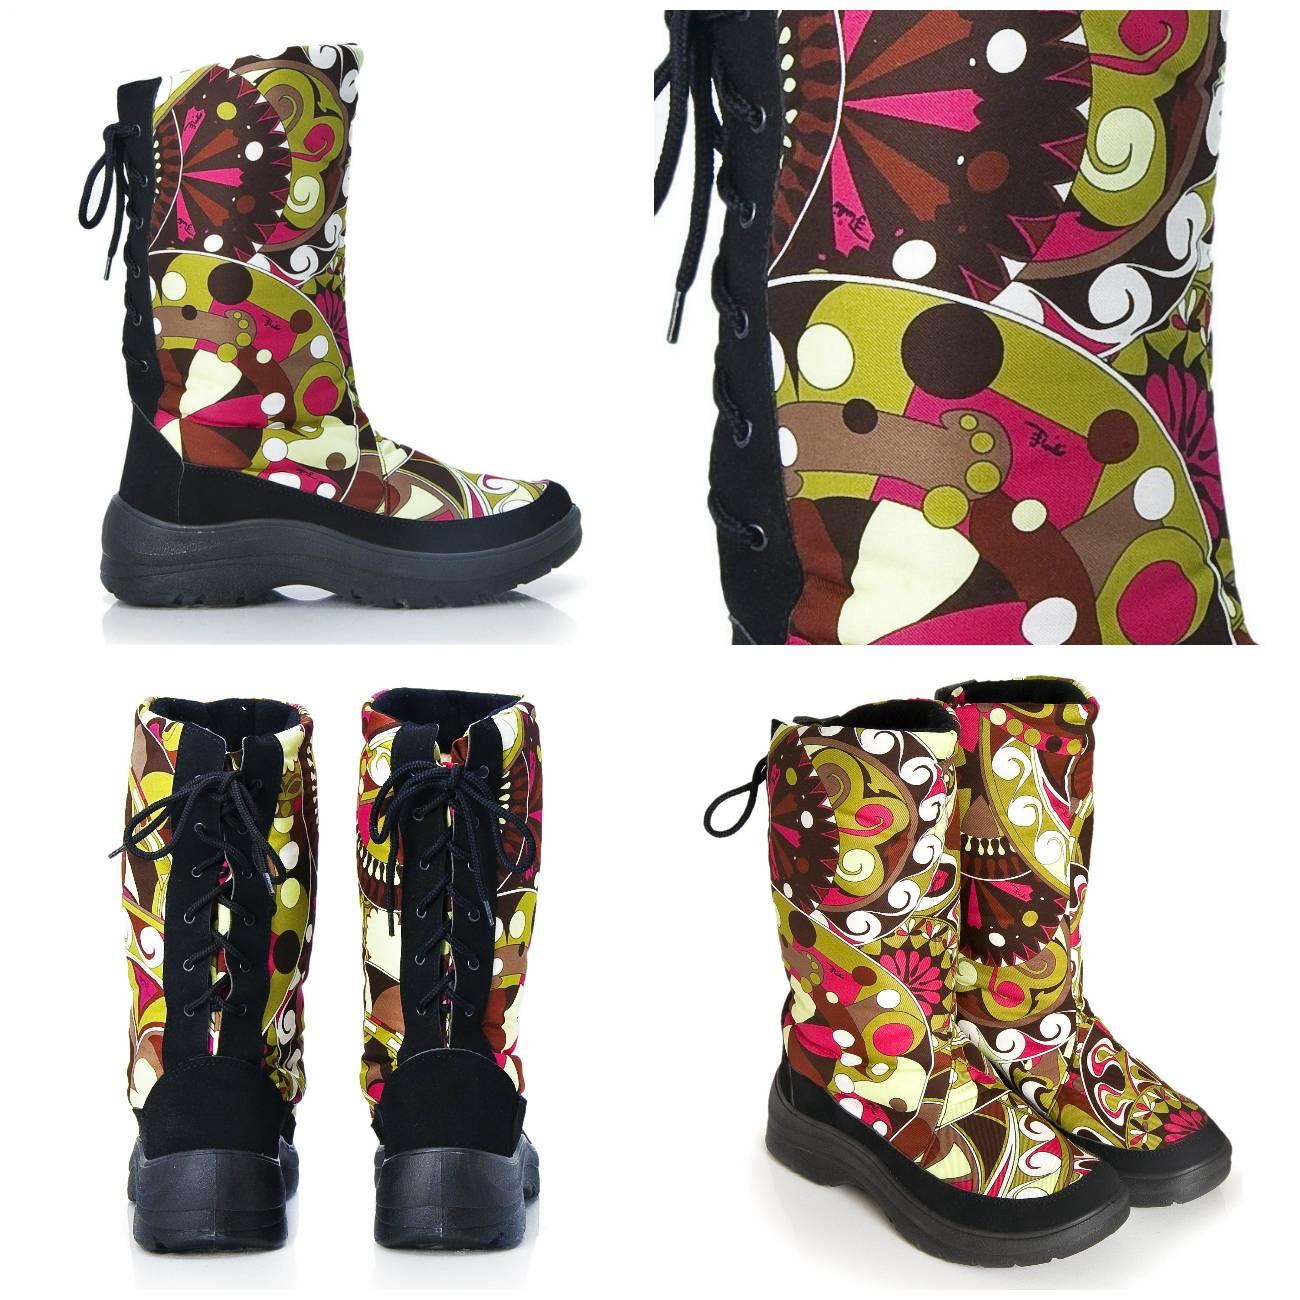 Emilio Pucci Snow Boots
Brand New
* Snow, Ski, Rain Boots
* Euro: 38 
* Waterproof Signature Pucci fabric in Fuchsia, Black, Burgundy and Greens
* Thick Insulated Wool Interior
* Rubber Soles
* Nubuck Trim 
* Laces up the Back
* Without Box